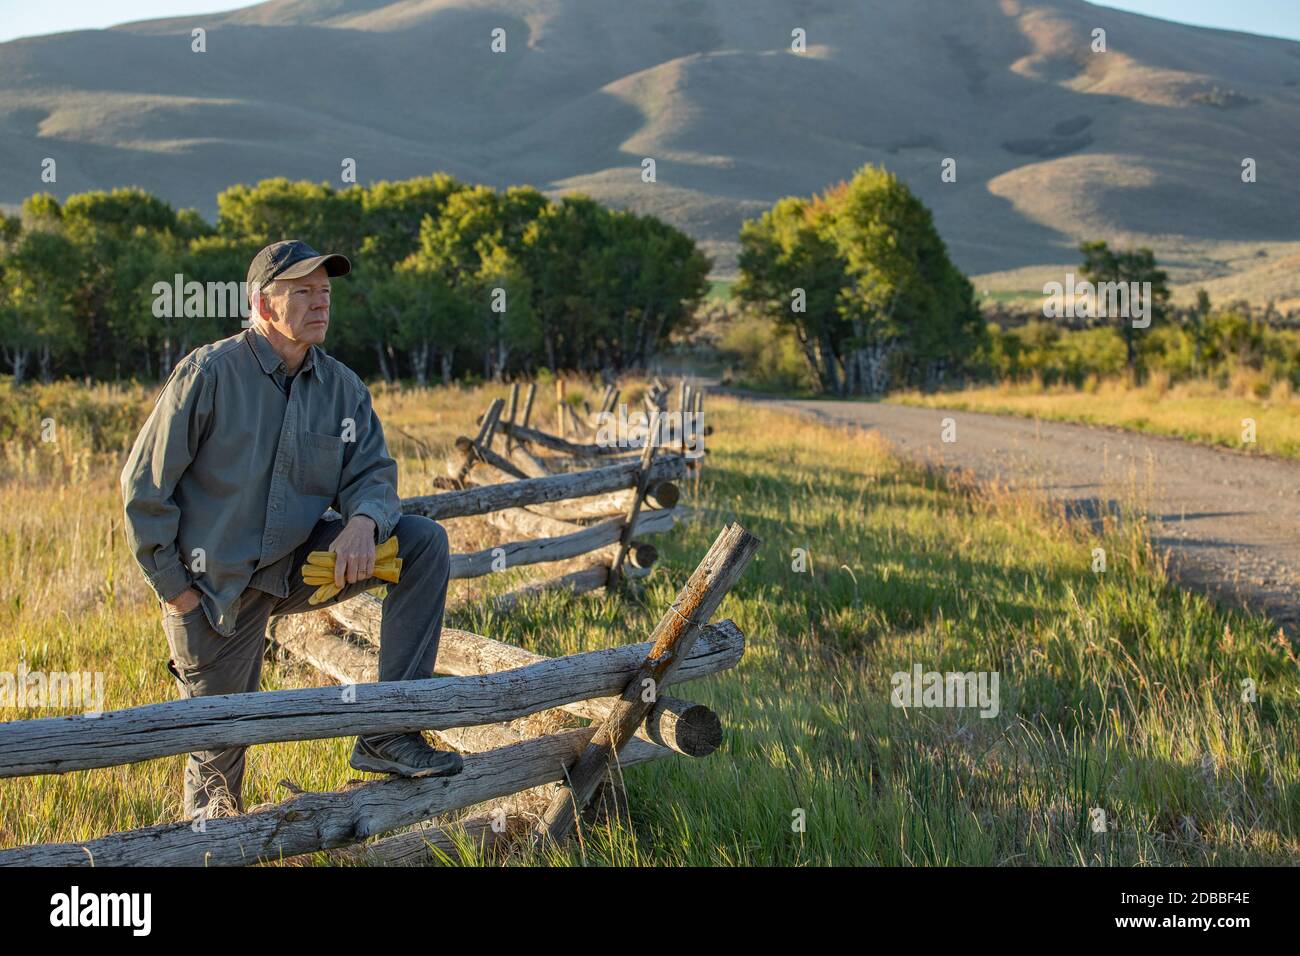 USA, Idaho, Bellevue, Farmer leaning against fence on field Stock Photo